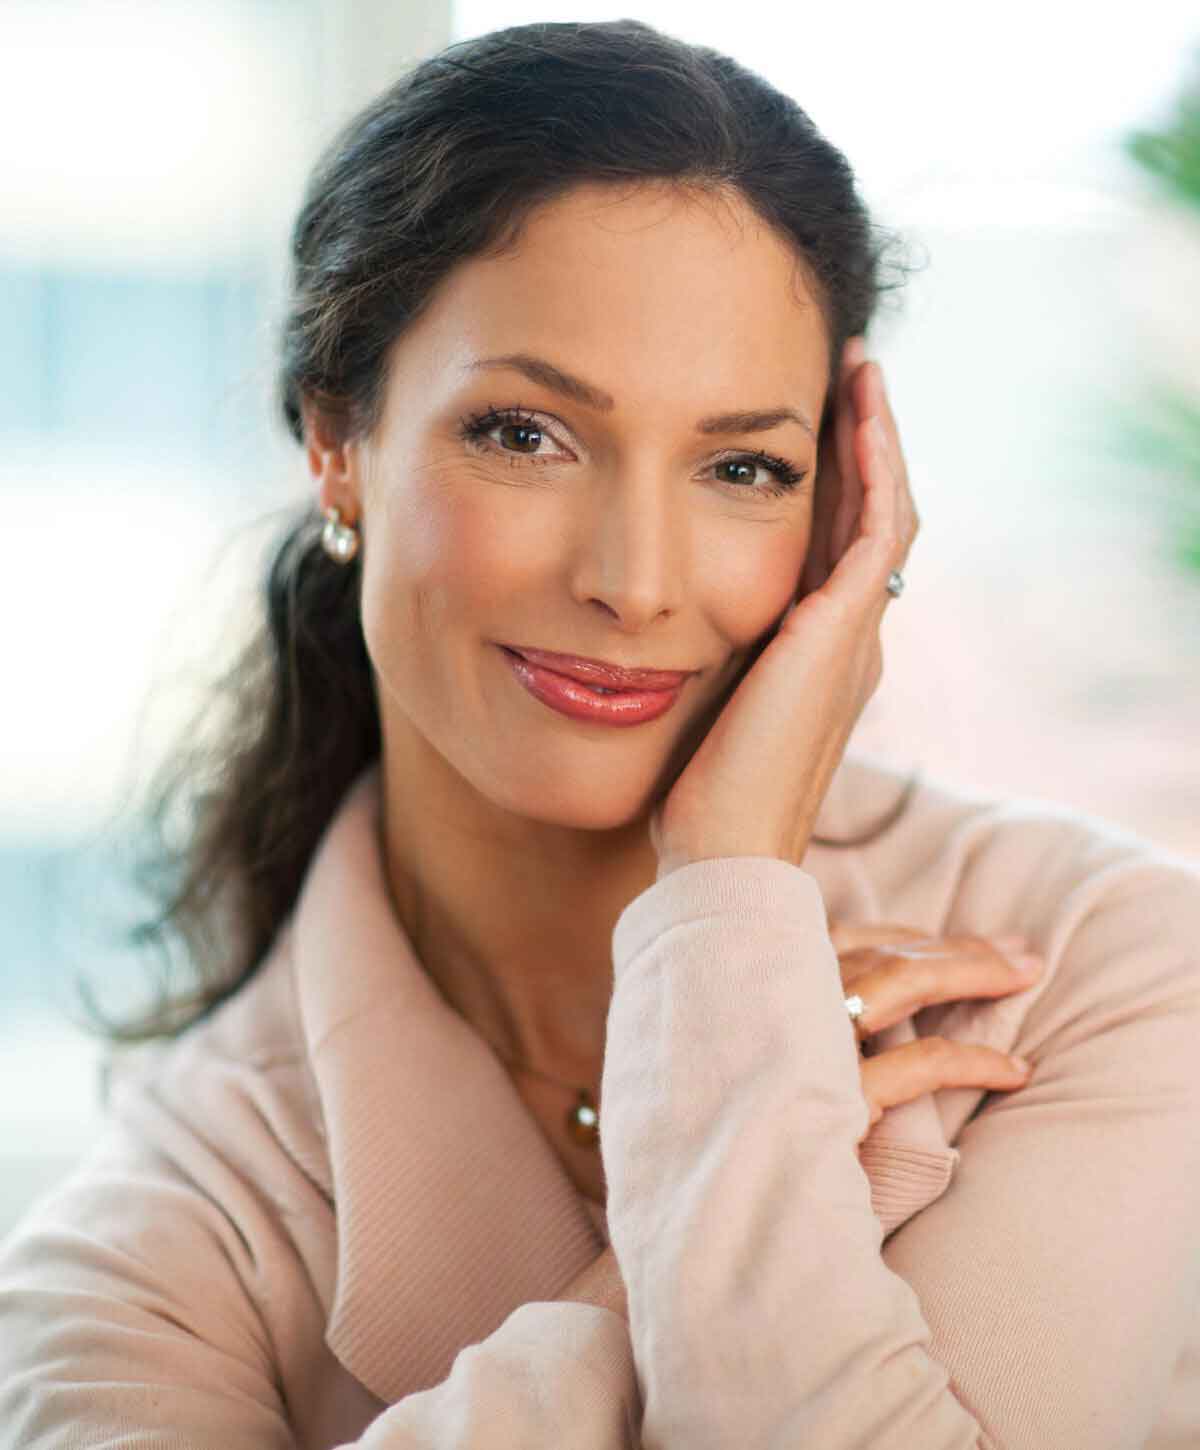 Almost all women over the age of 40 begin to experience hormone imbalance